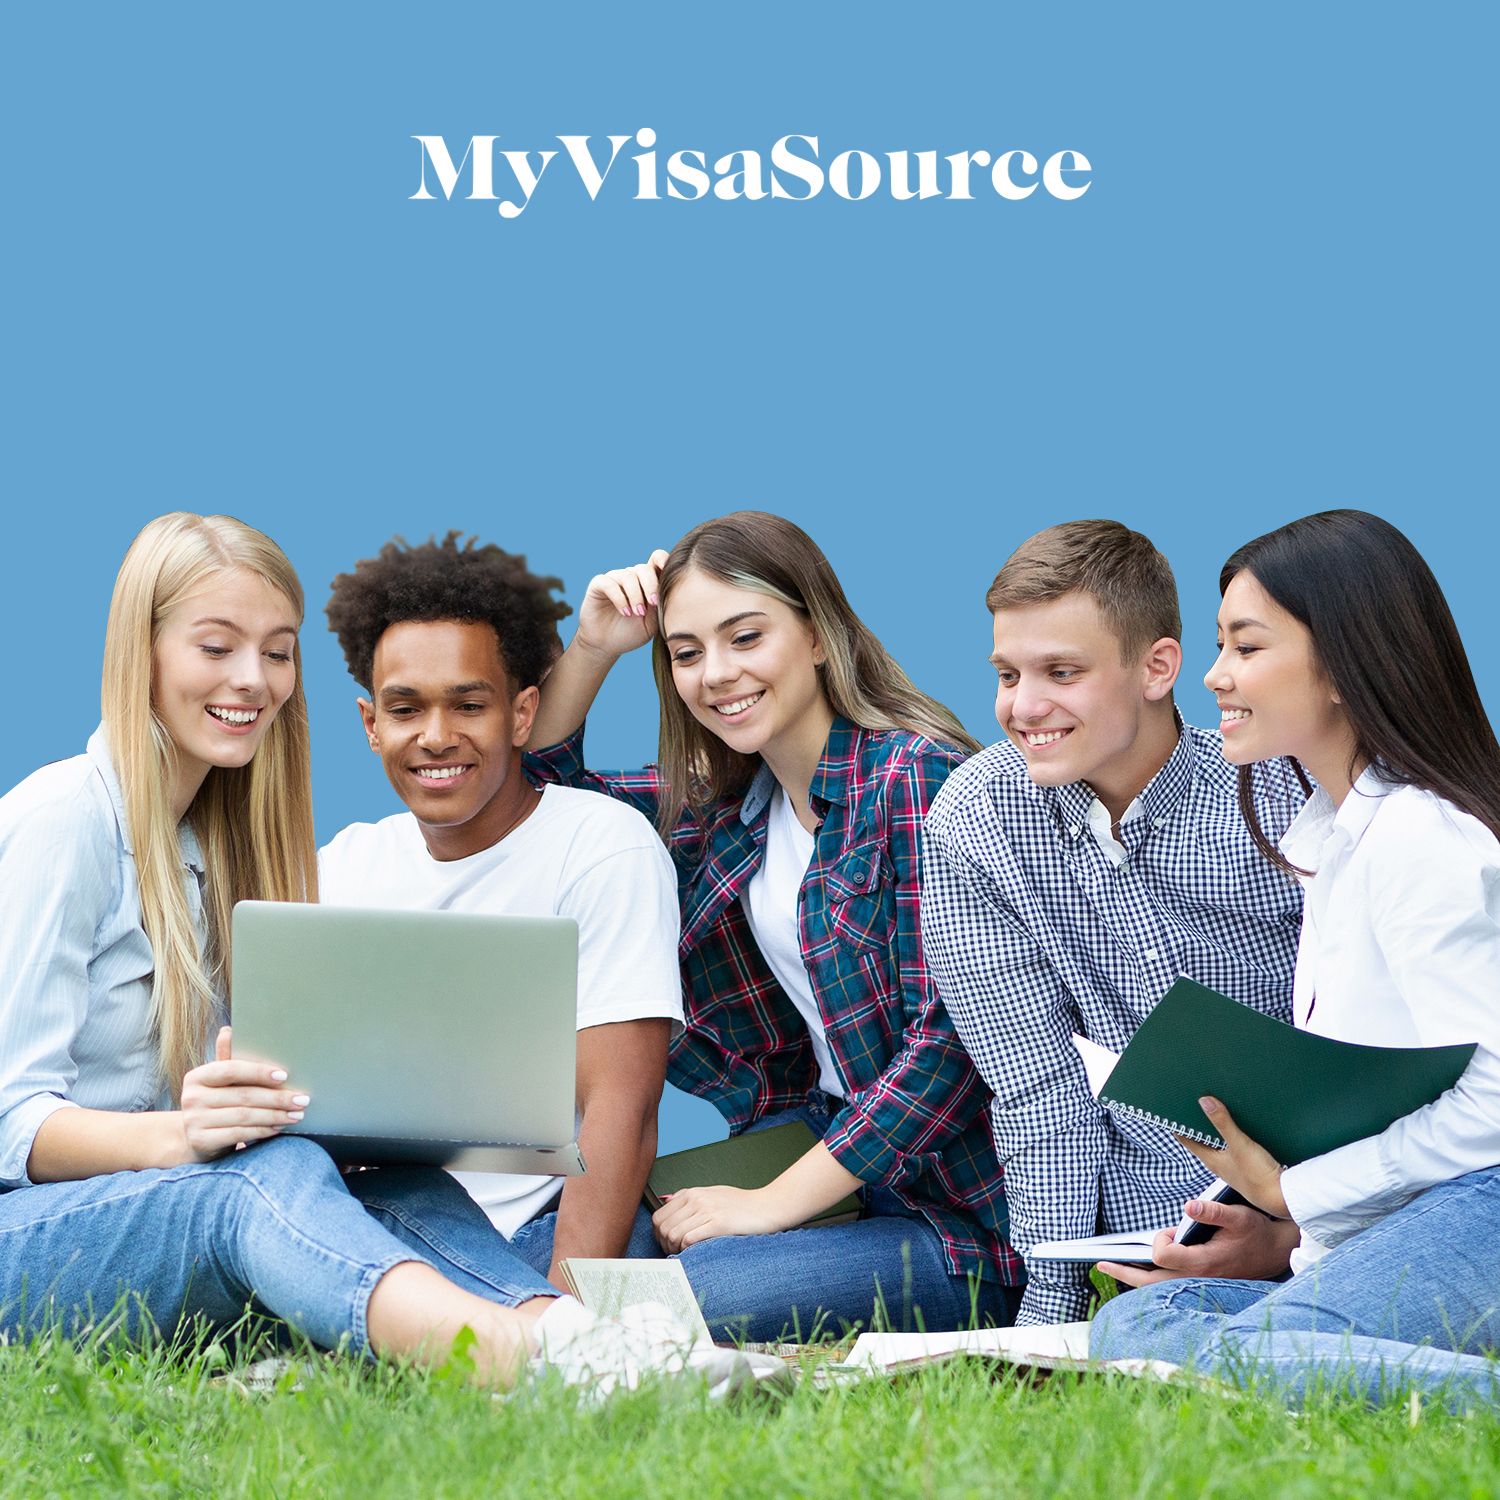 cheerful and young students viewing a laptop my visa source